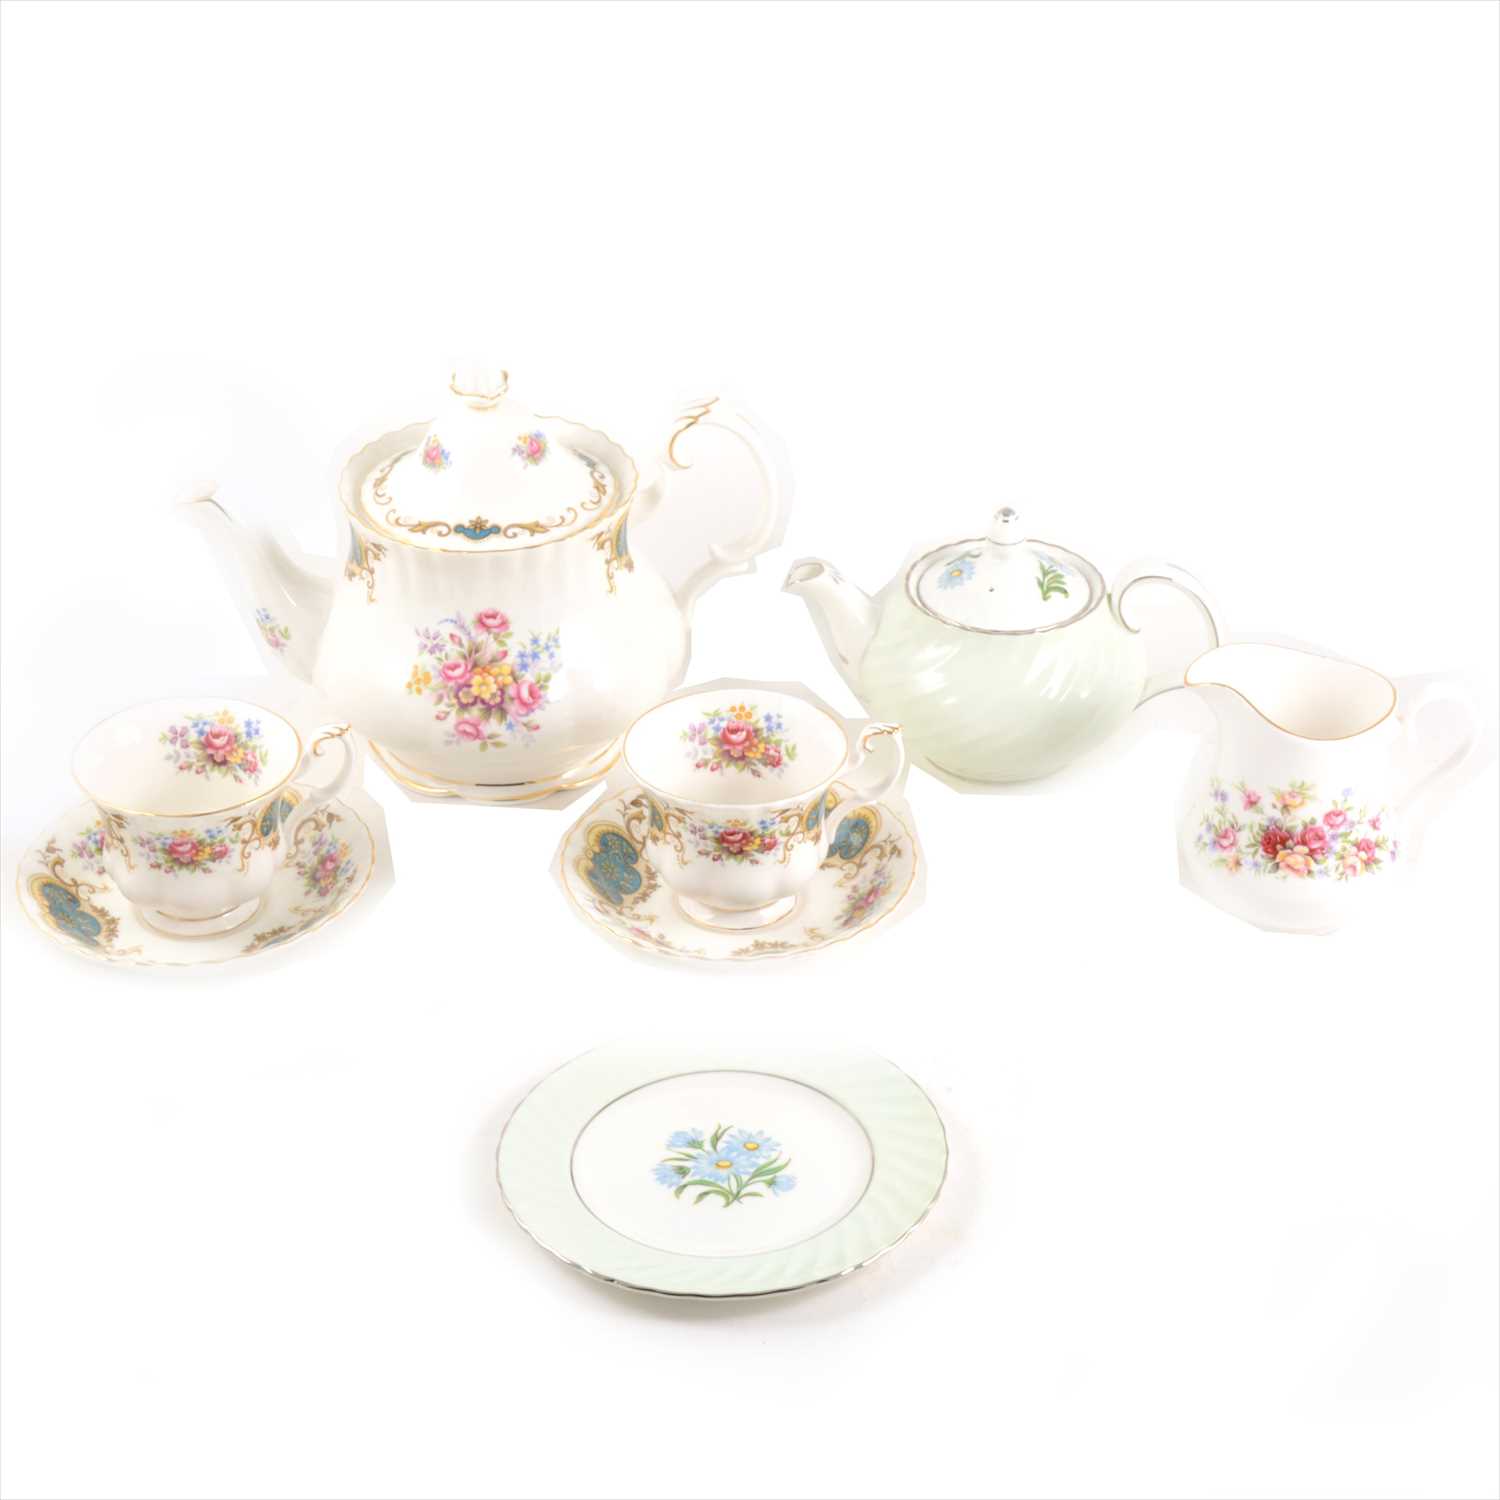 Lot 90 - A quantity of tea and dinner ware, including Royal Albert 'Berkeley' pattern, Queen Anne ware, etc